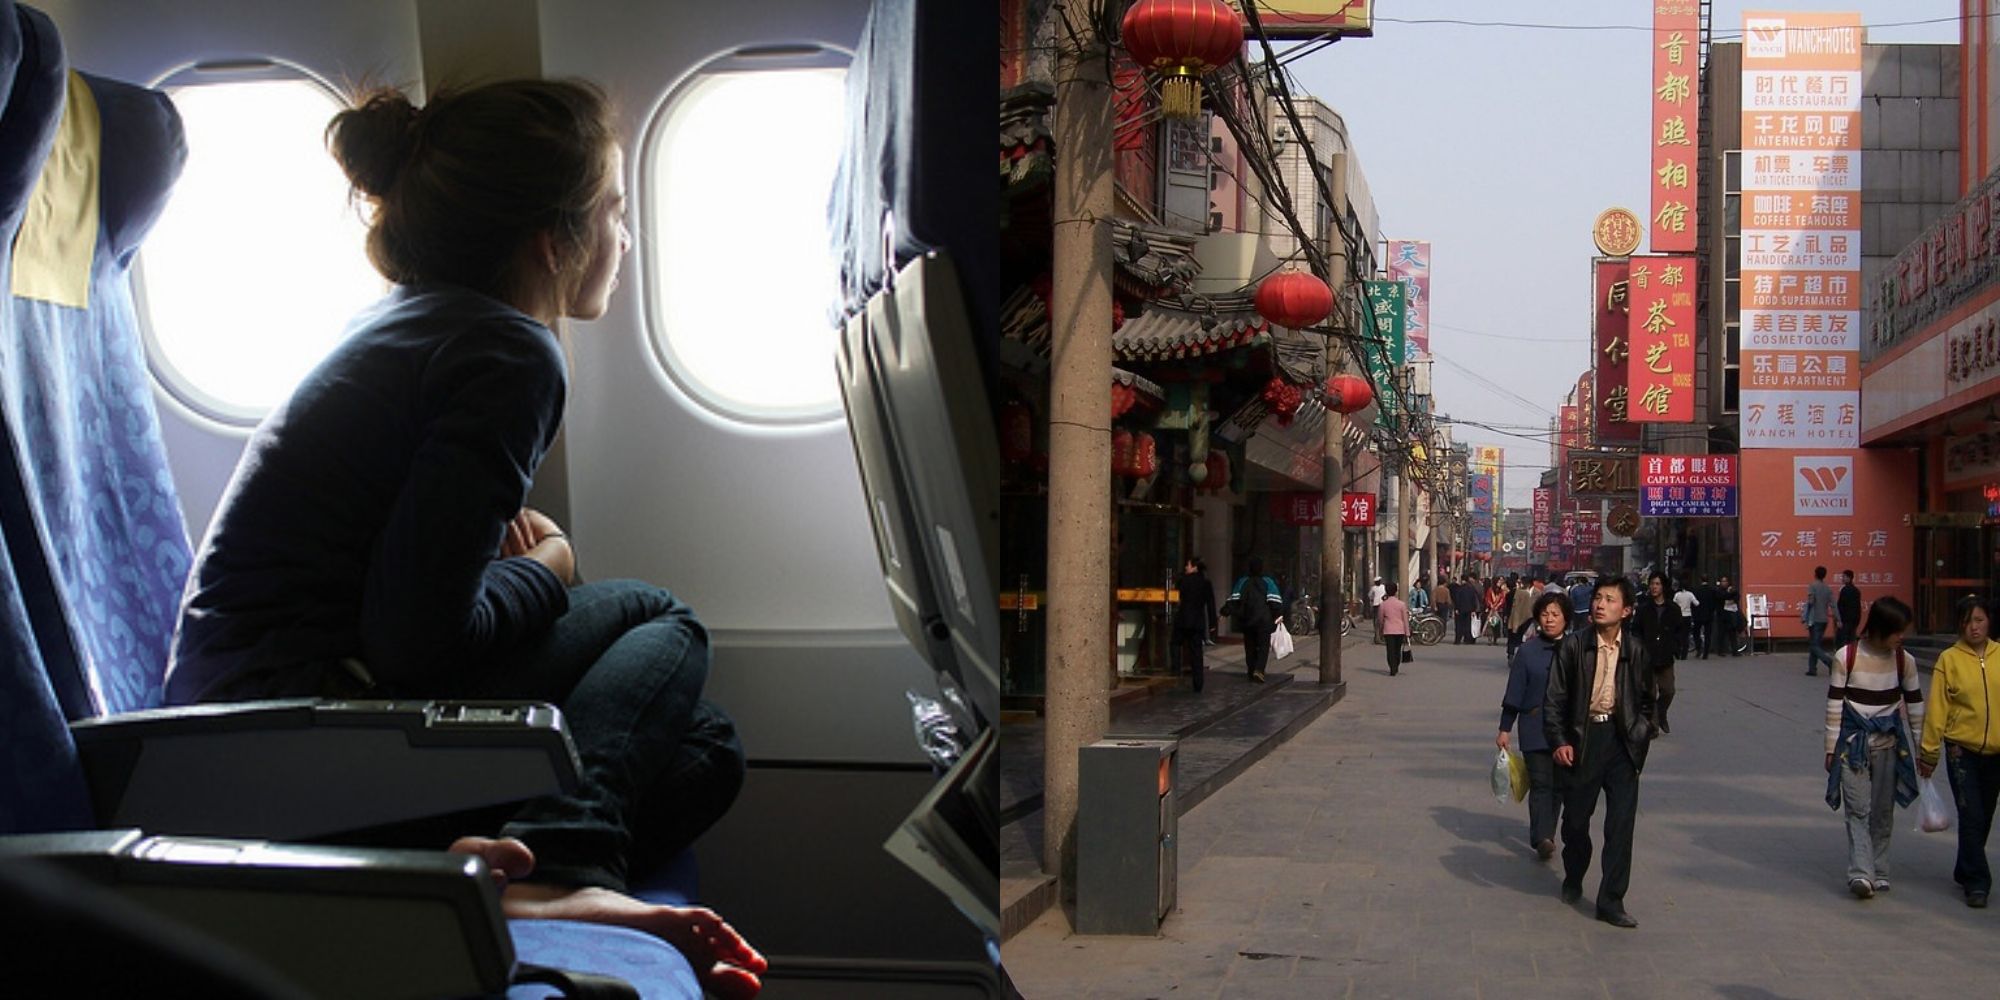 girl on airplane and street in beijing china